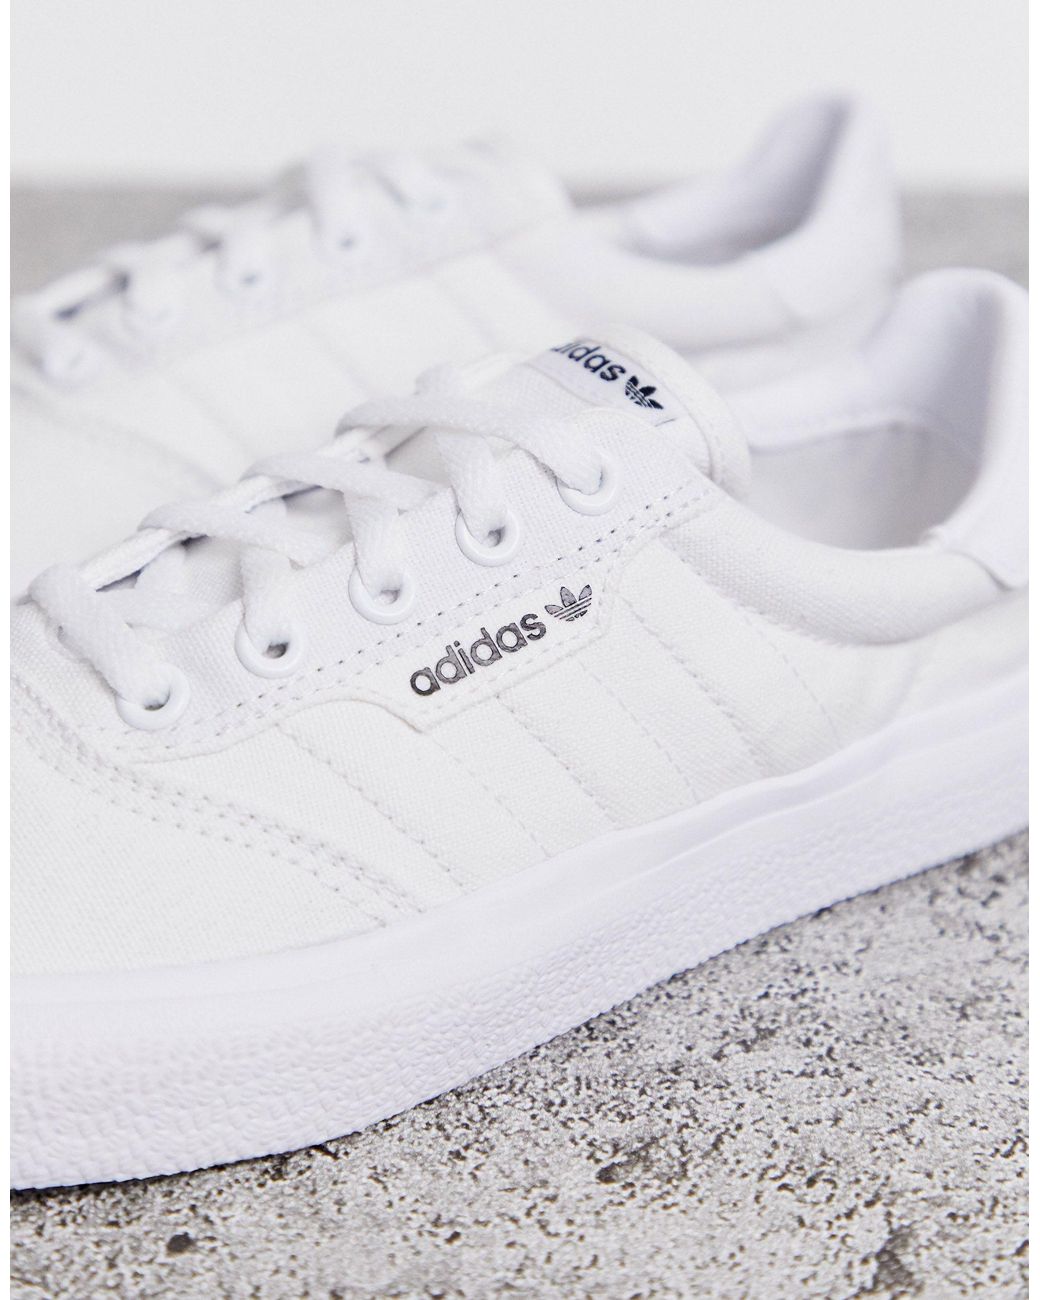 adidas Originals 3mc Skate Shoes in White for Men - Save 18% - Lyst